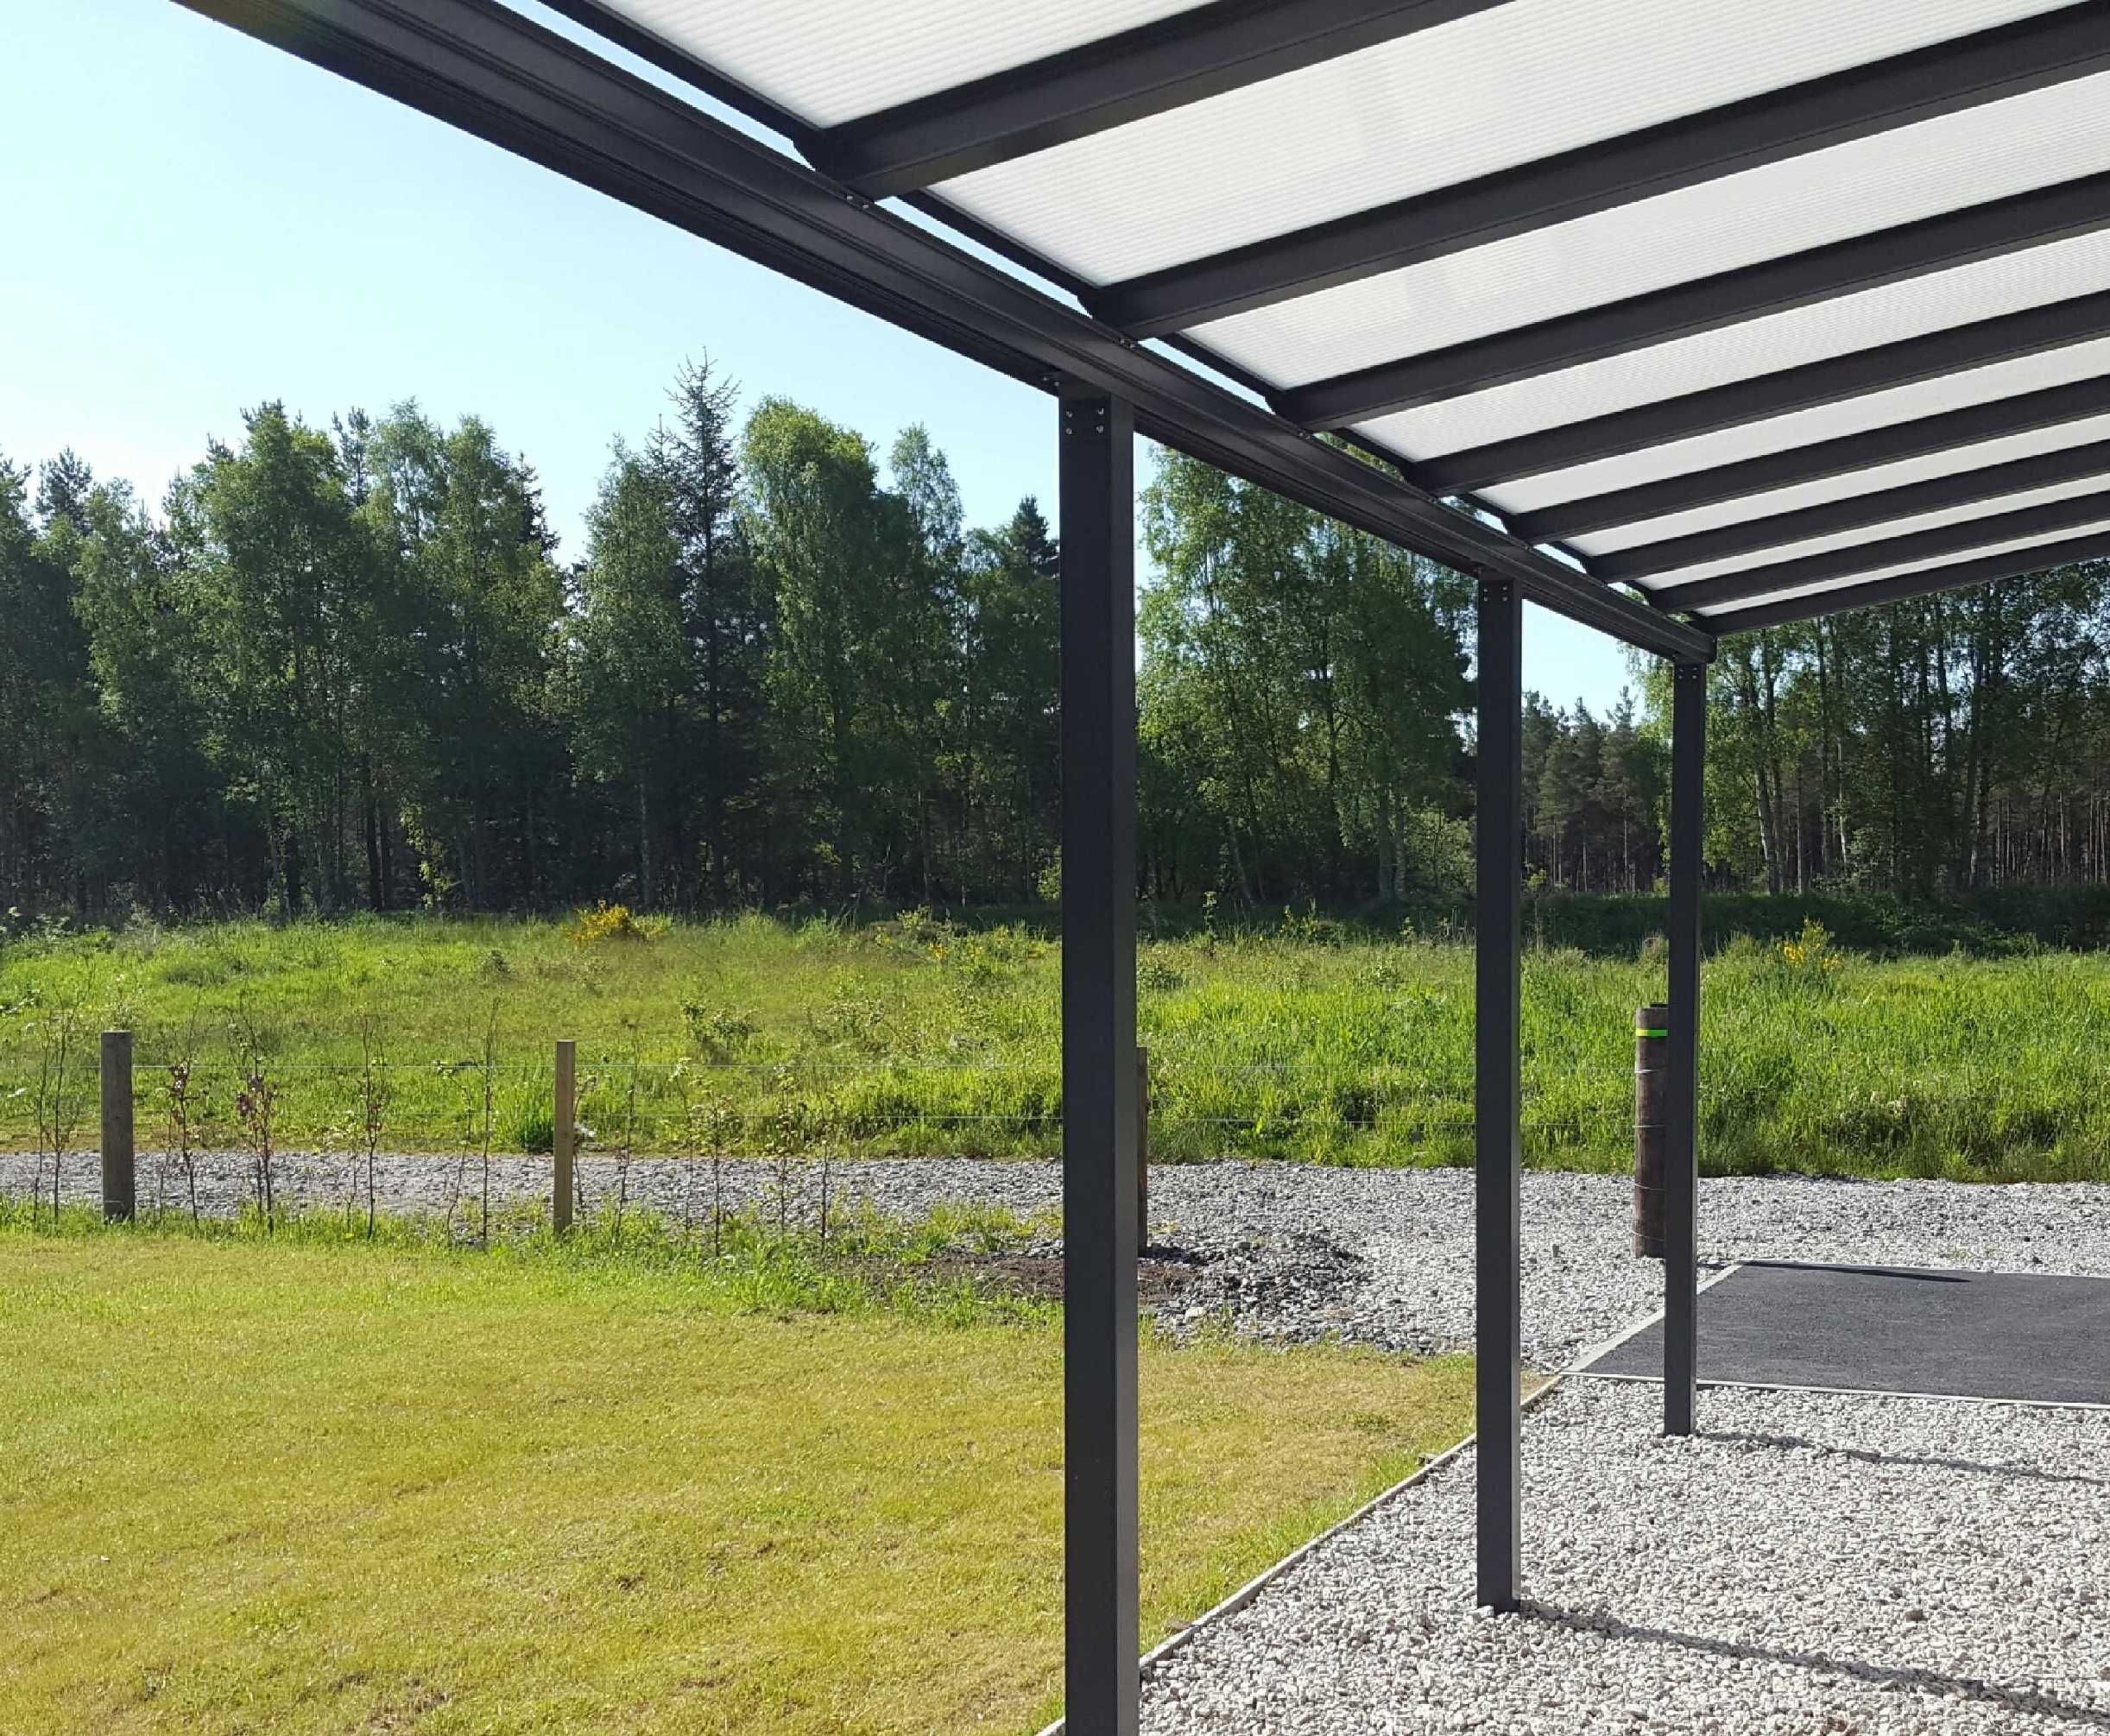 Omega Smart Lean-To Canopy, Anthracite Grey, 6mm Glass Clear Plate Polycarbonate Glazing - 9.8m (W) x 3.5m (P), (5) Supporting Posts